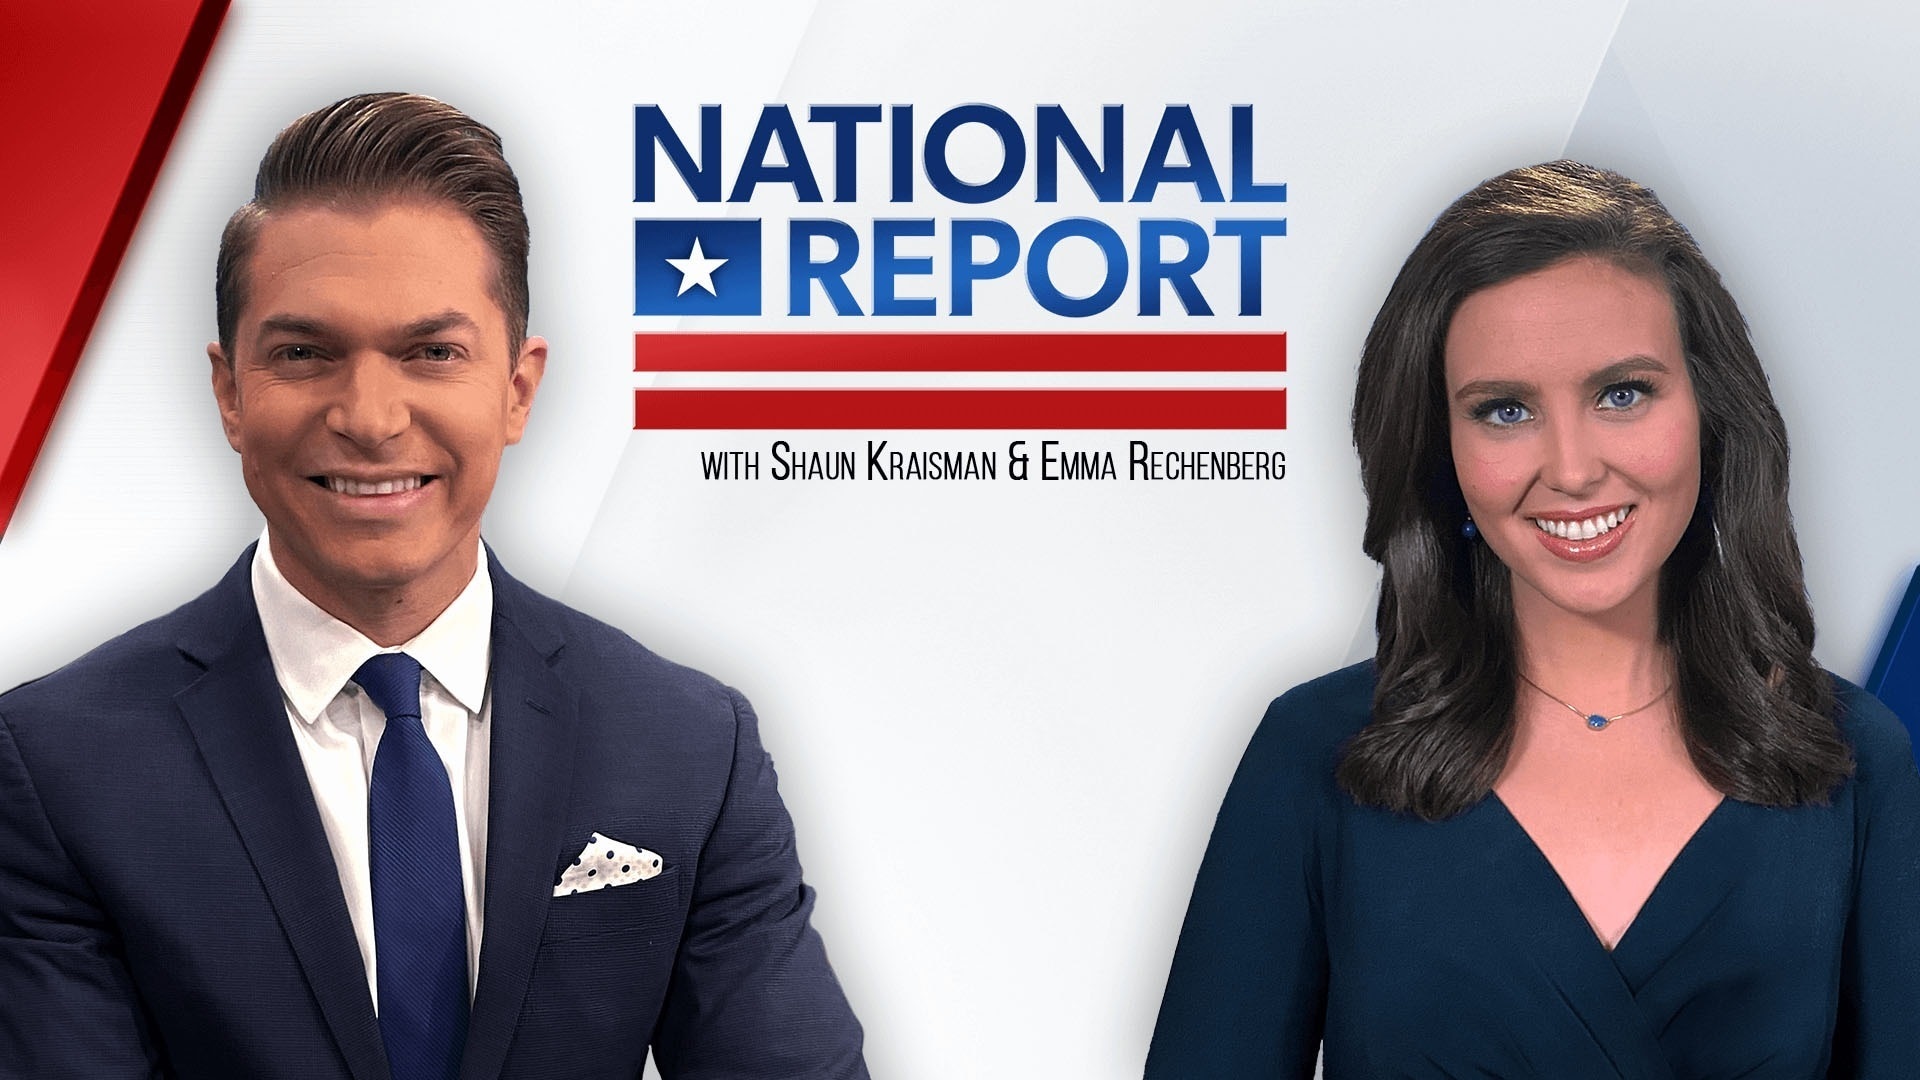 The National Report